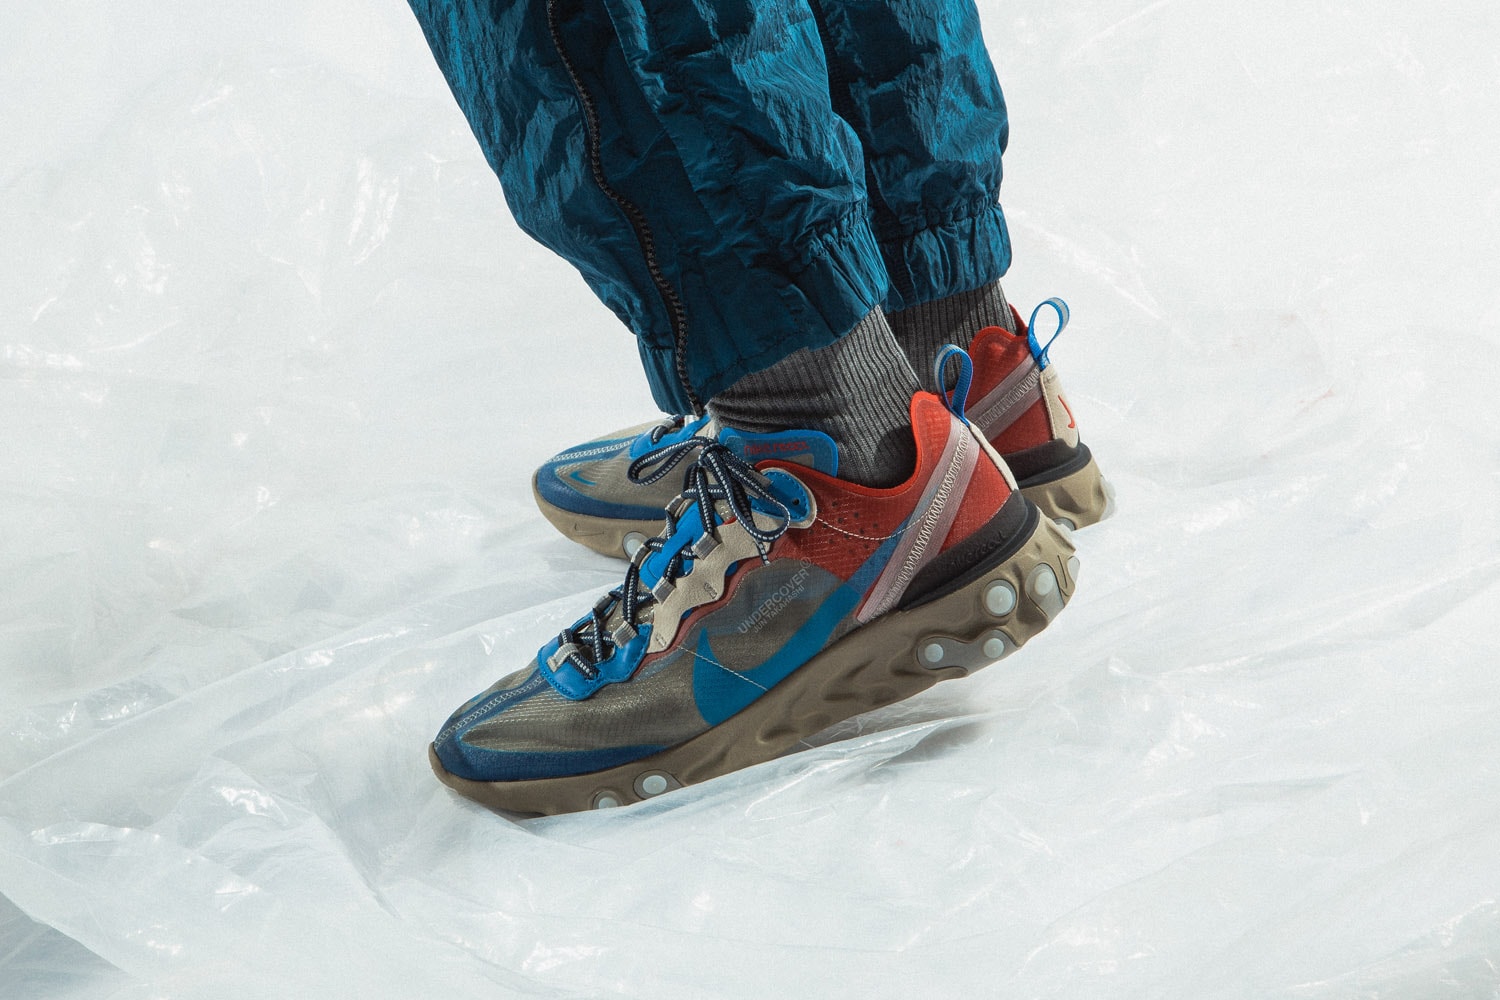 UNDERCOVER Nike React Element 87 On Foot Look Red Green White Blue Maroon Red Brown Clear Orange Neon Jun Takahashi